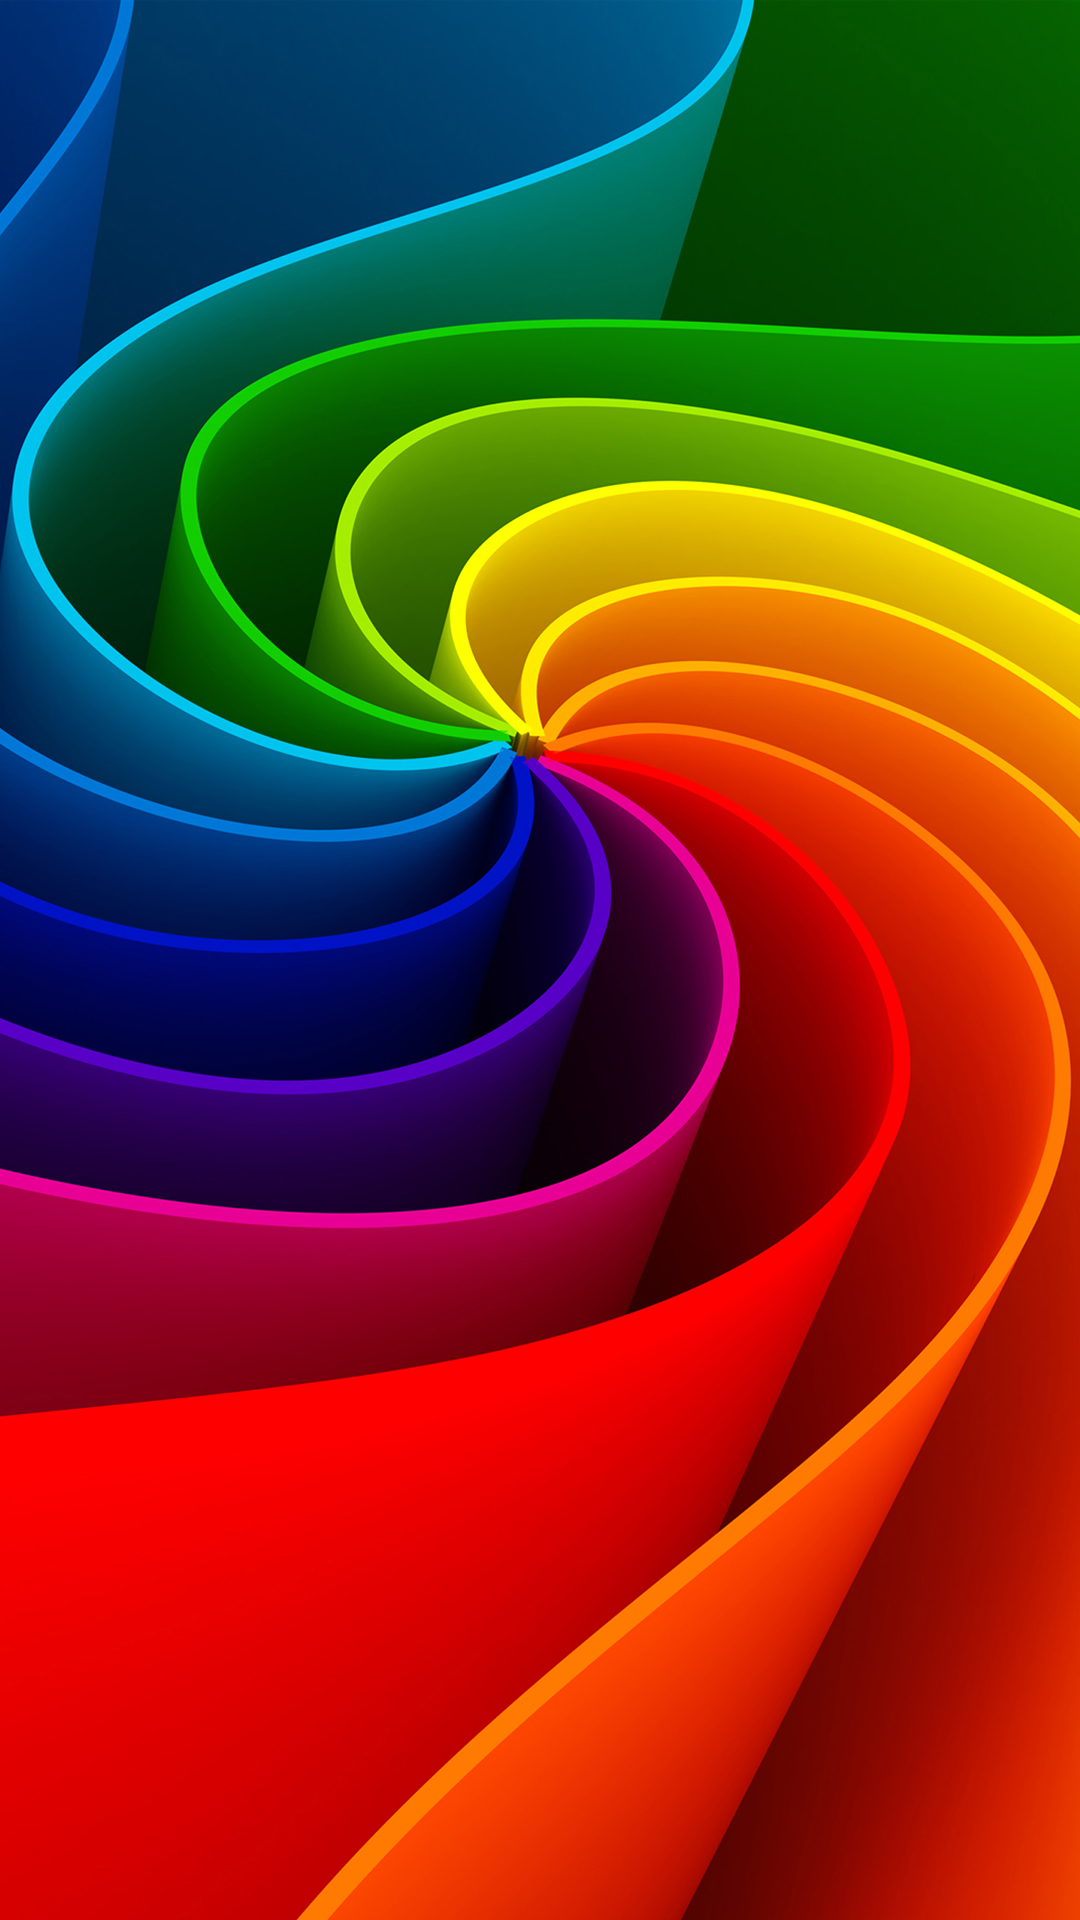 Colorful 3d Swirl iPhone Wallpaper